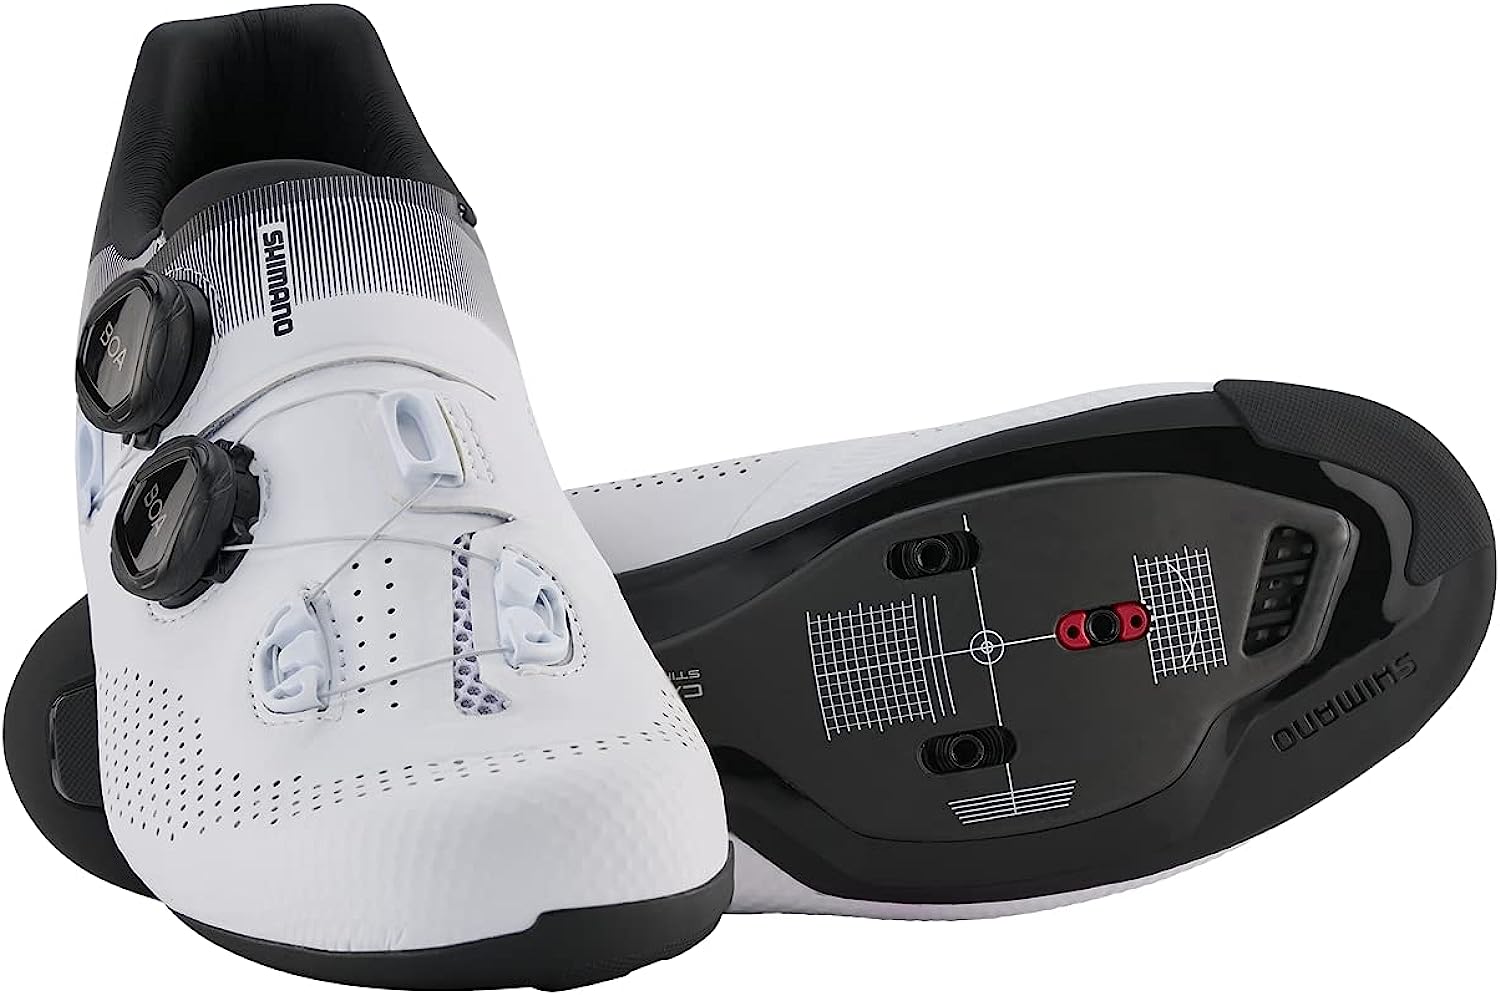 SHIMANO SH-RC702 Competition-Level Men's Road Cycling Shoe